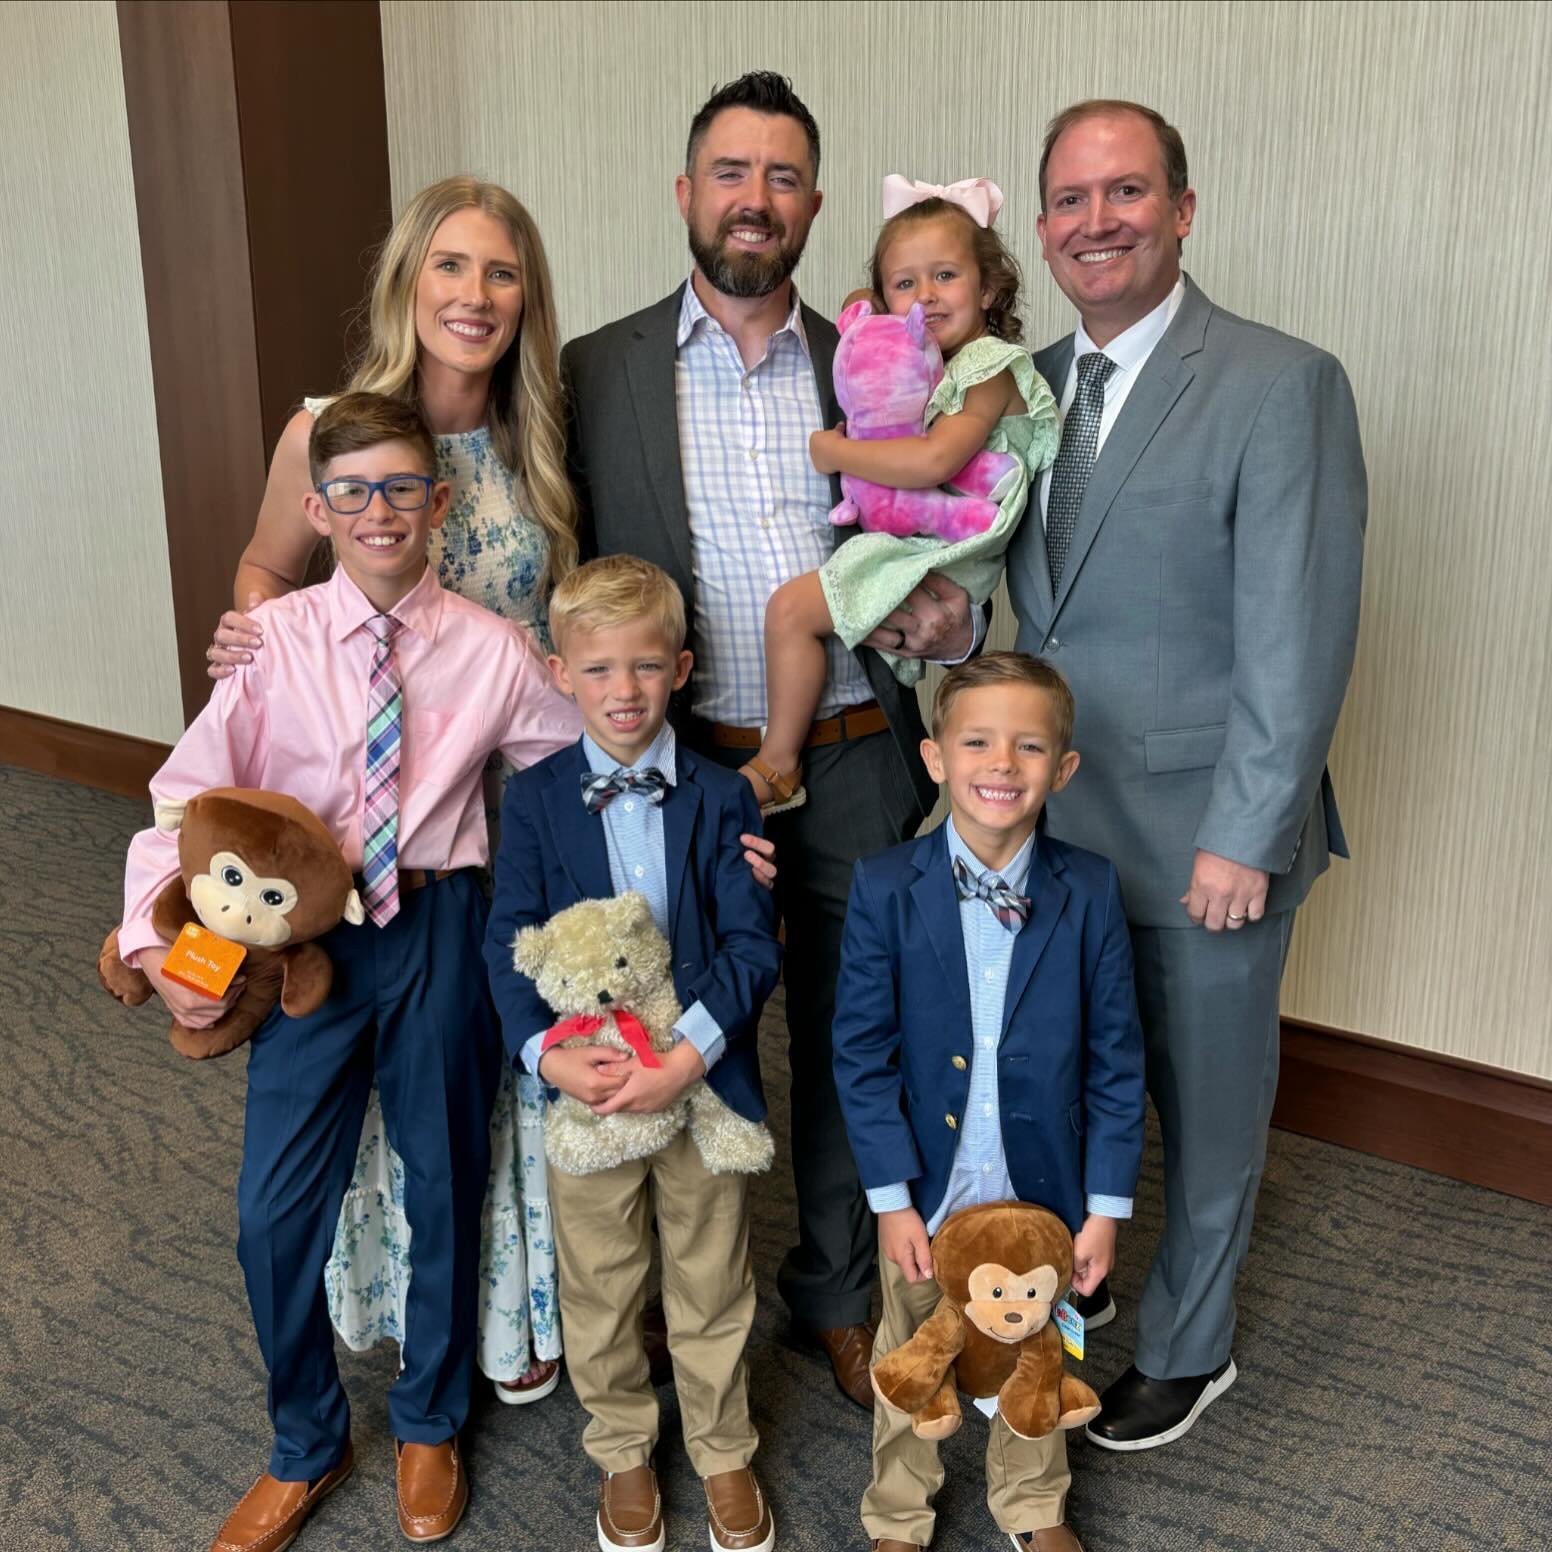 Thankful to be able to share in this special adoption day with this great family!  Congratulations to the &ldquo;D&rdquo; family!